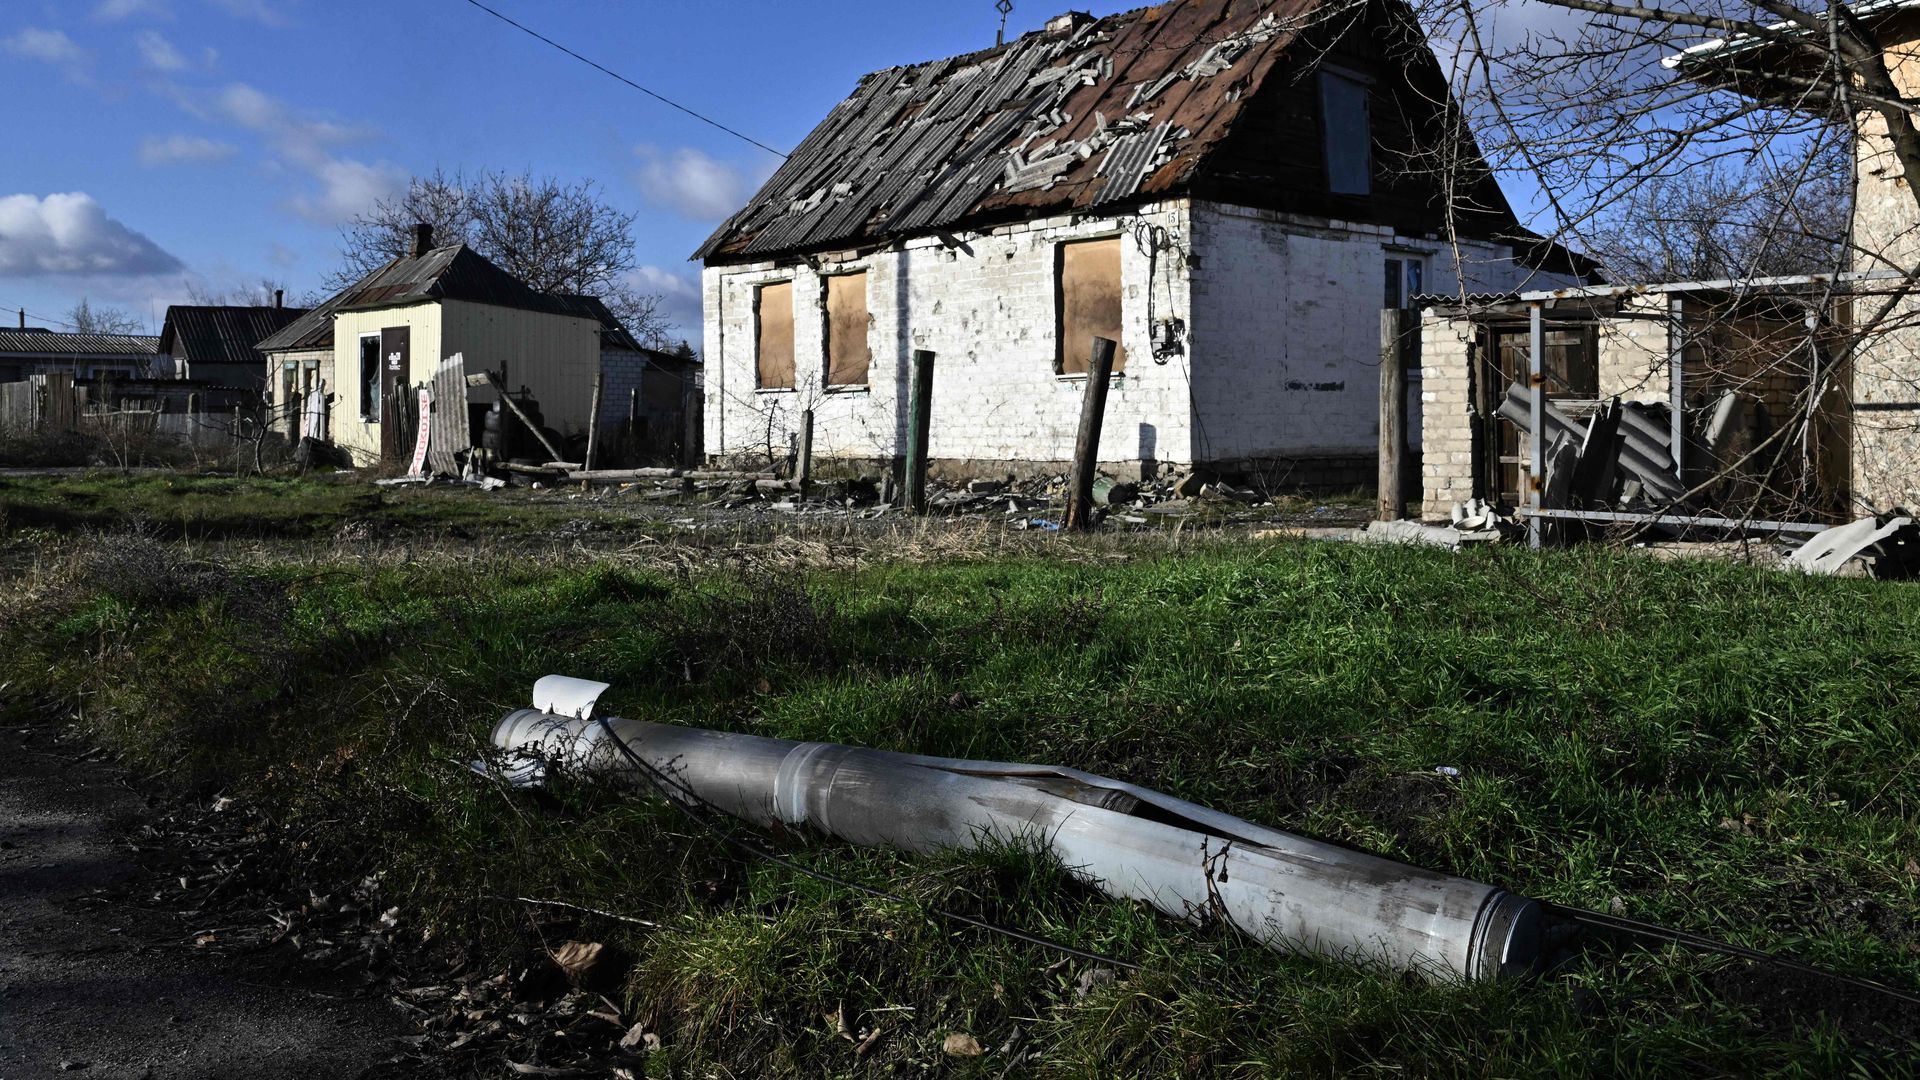 A rocket next to damaged houses in Donetsk region